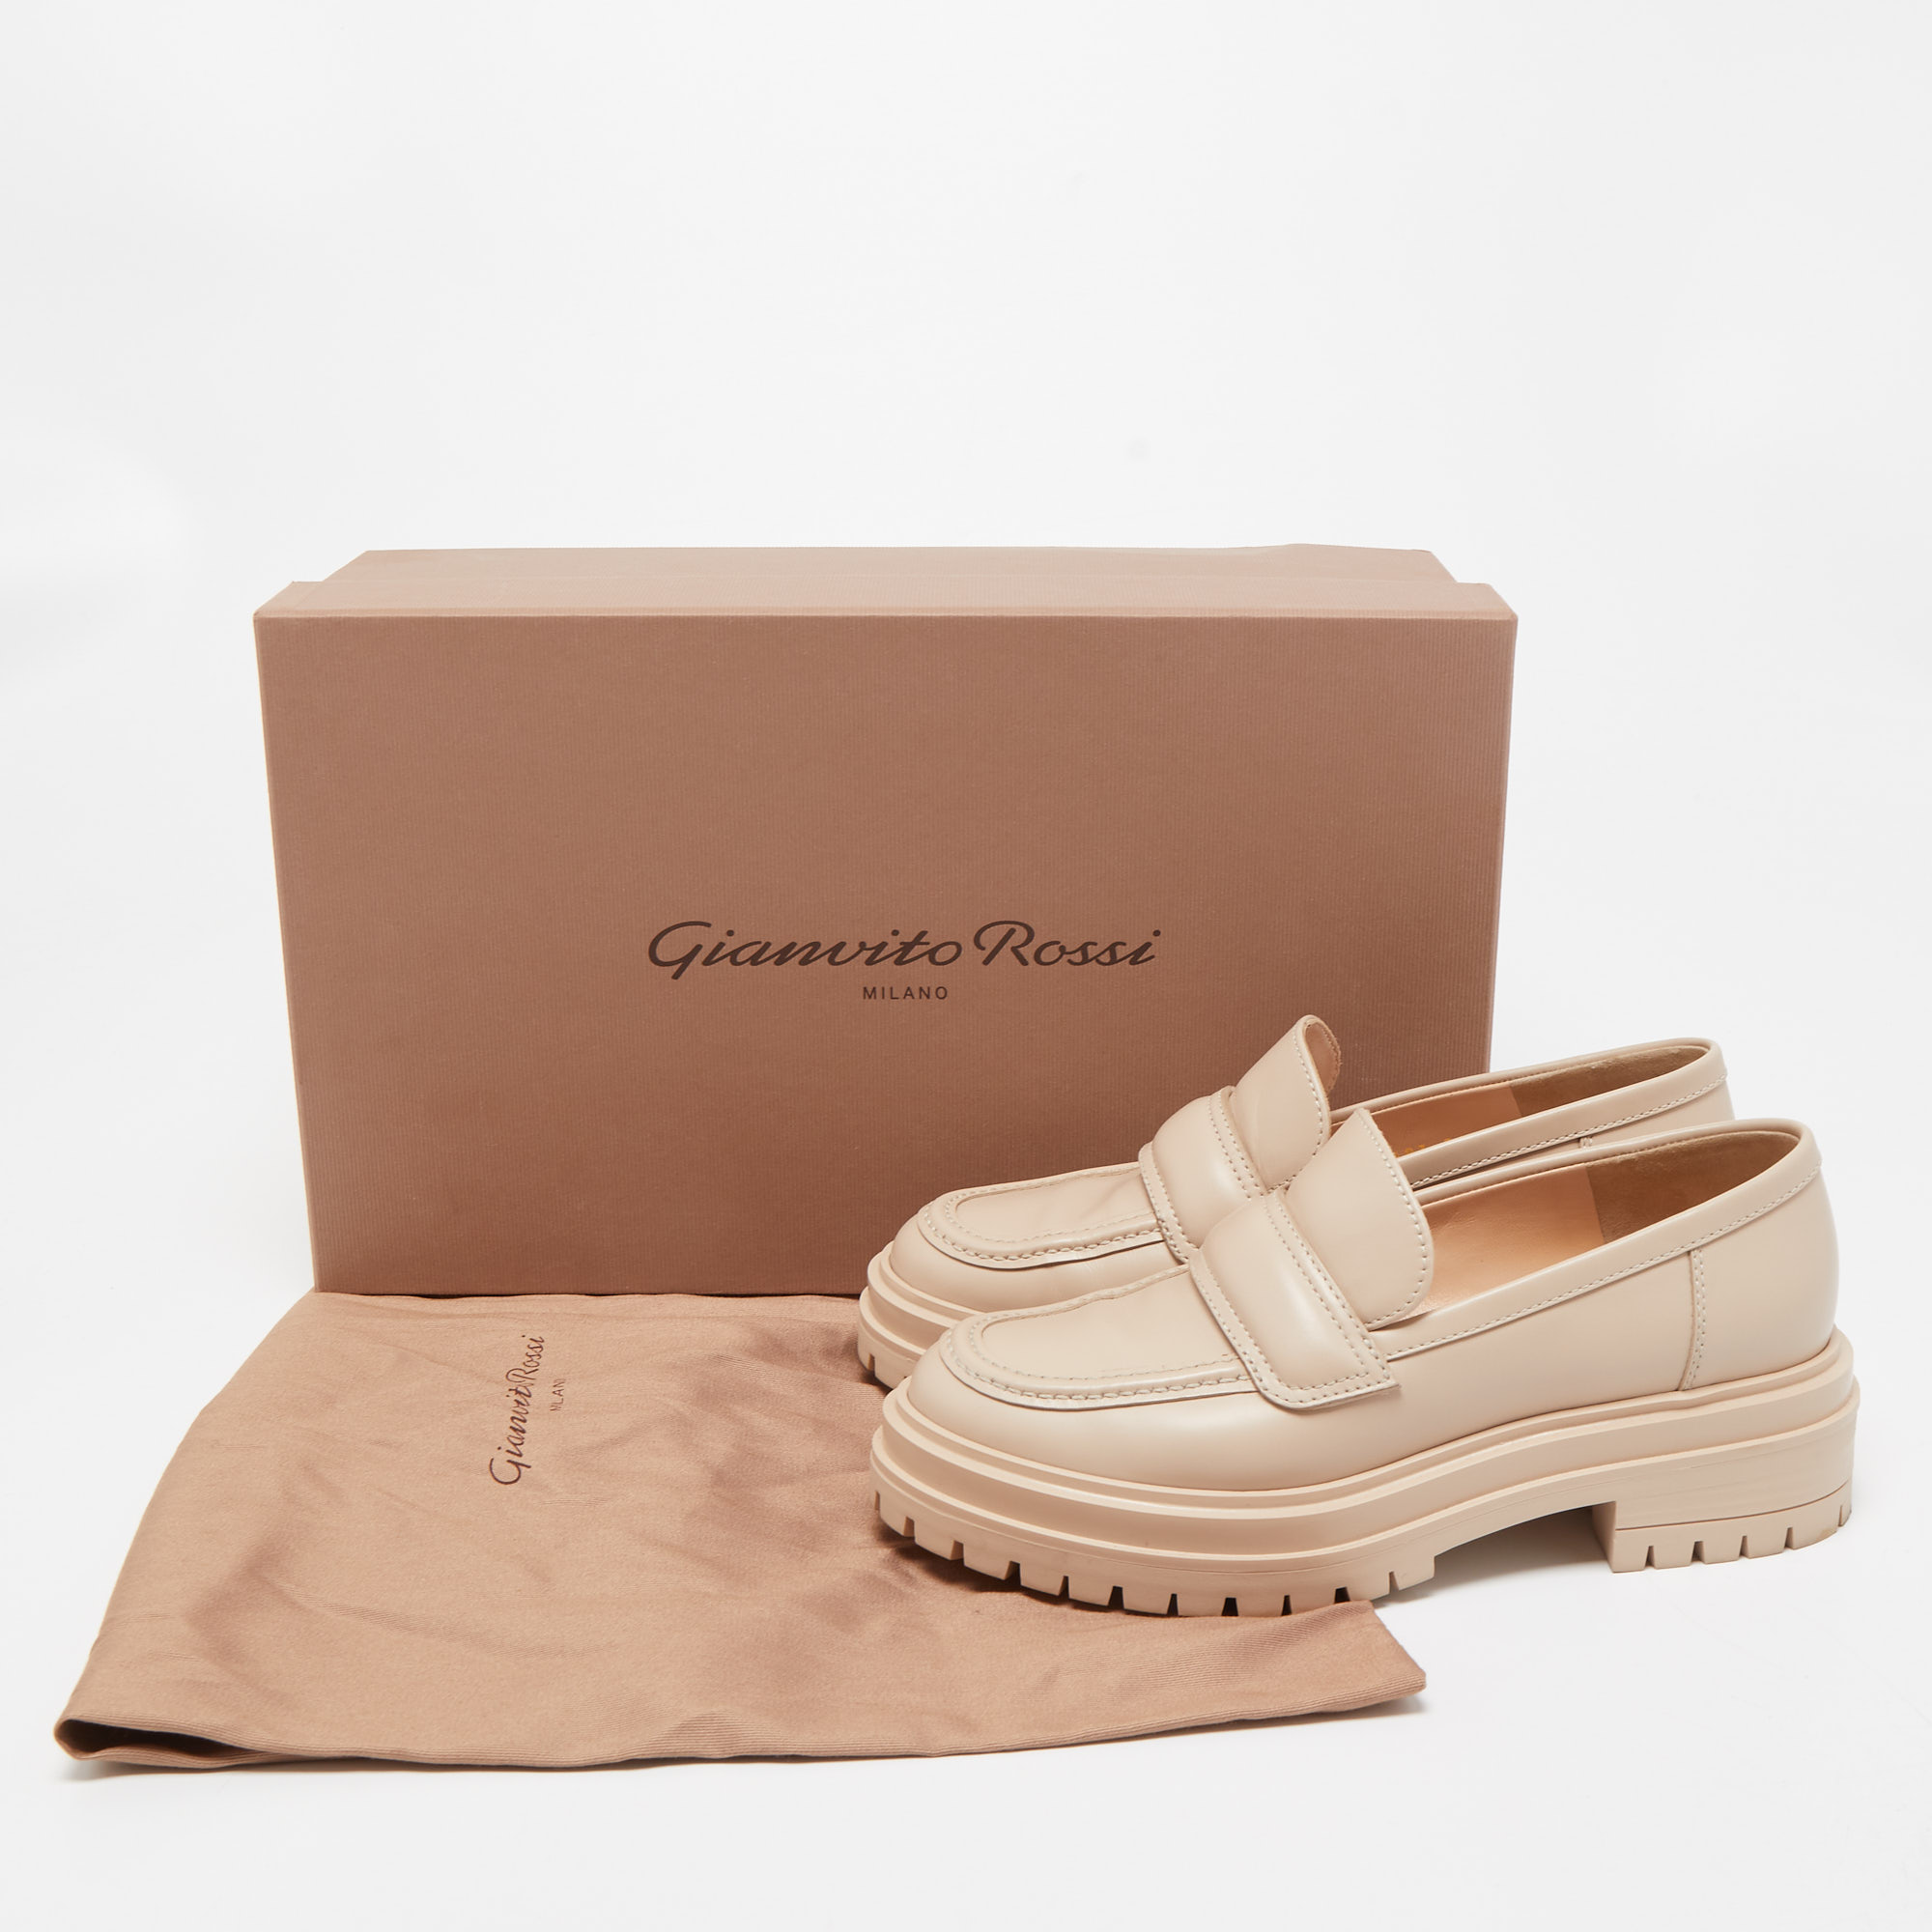 Gianvito Rossi Beige Leather Argo Loafers Size 35.5